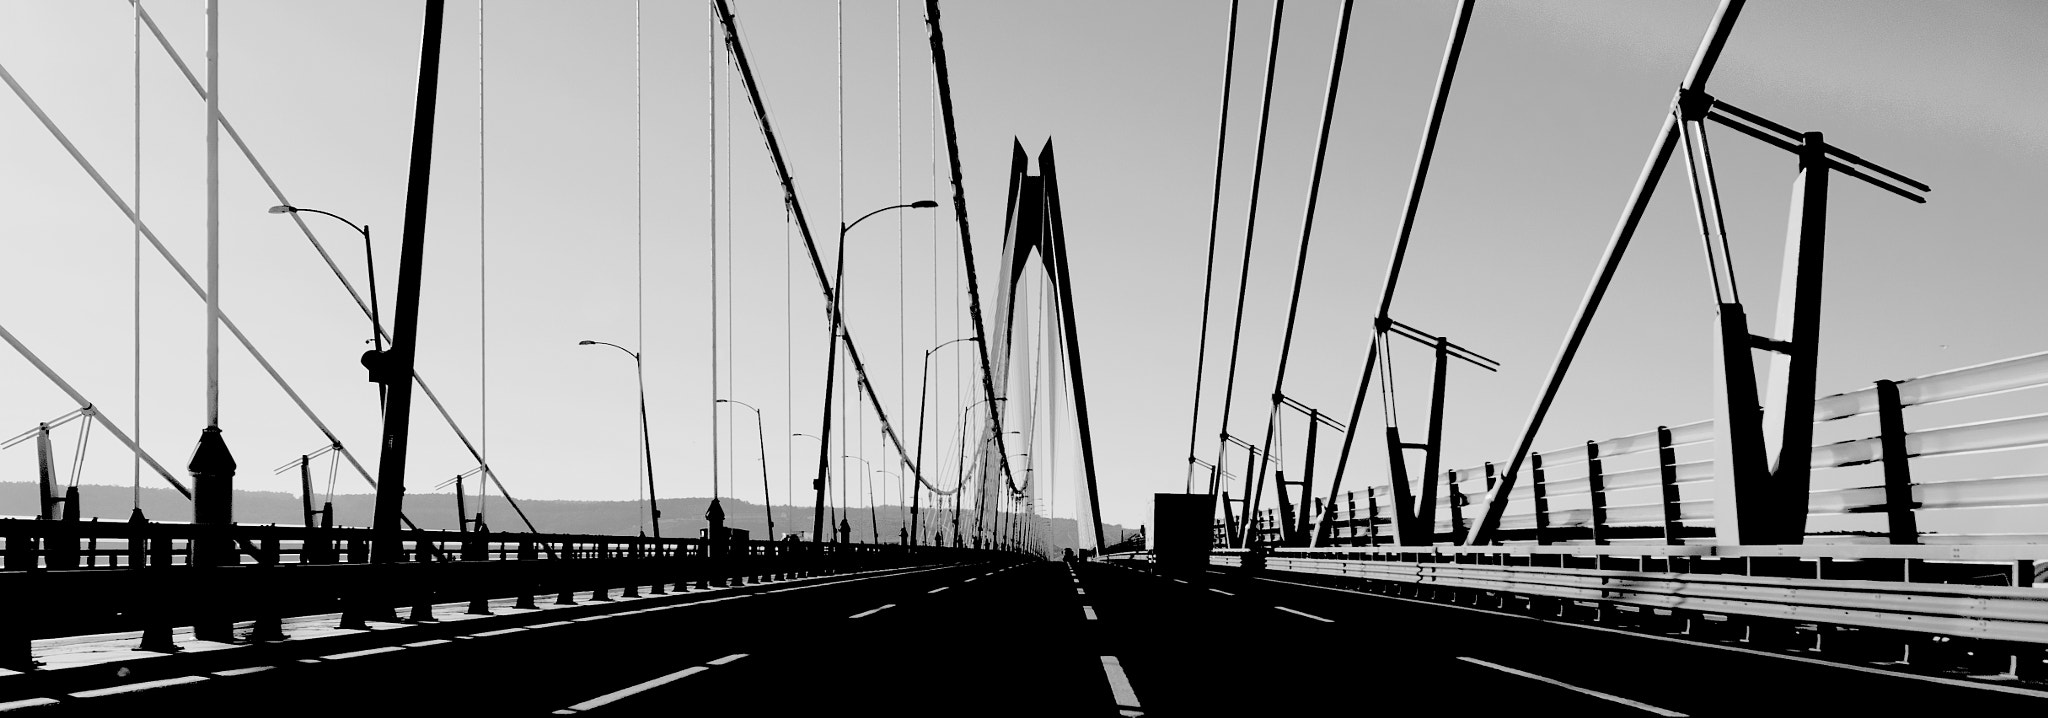 Nikon D810 sample photo. Corssing the yss bridge from asia to europe b&w photography